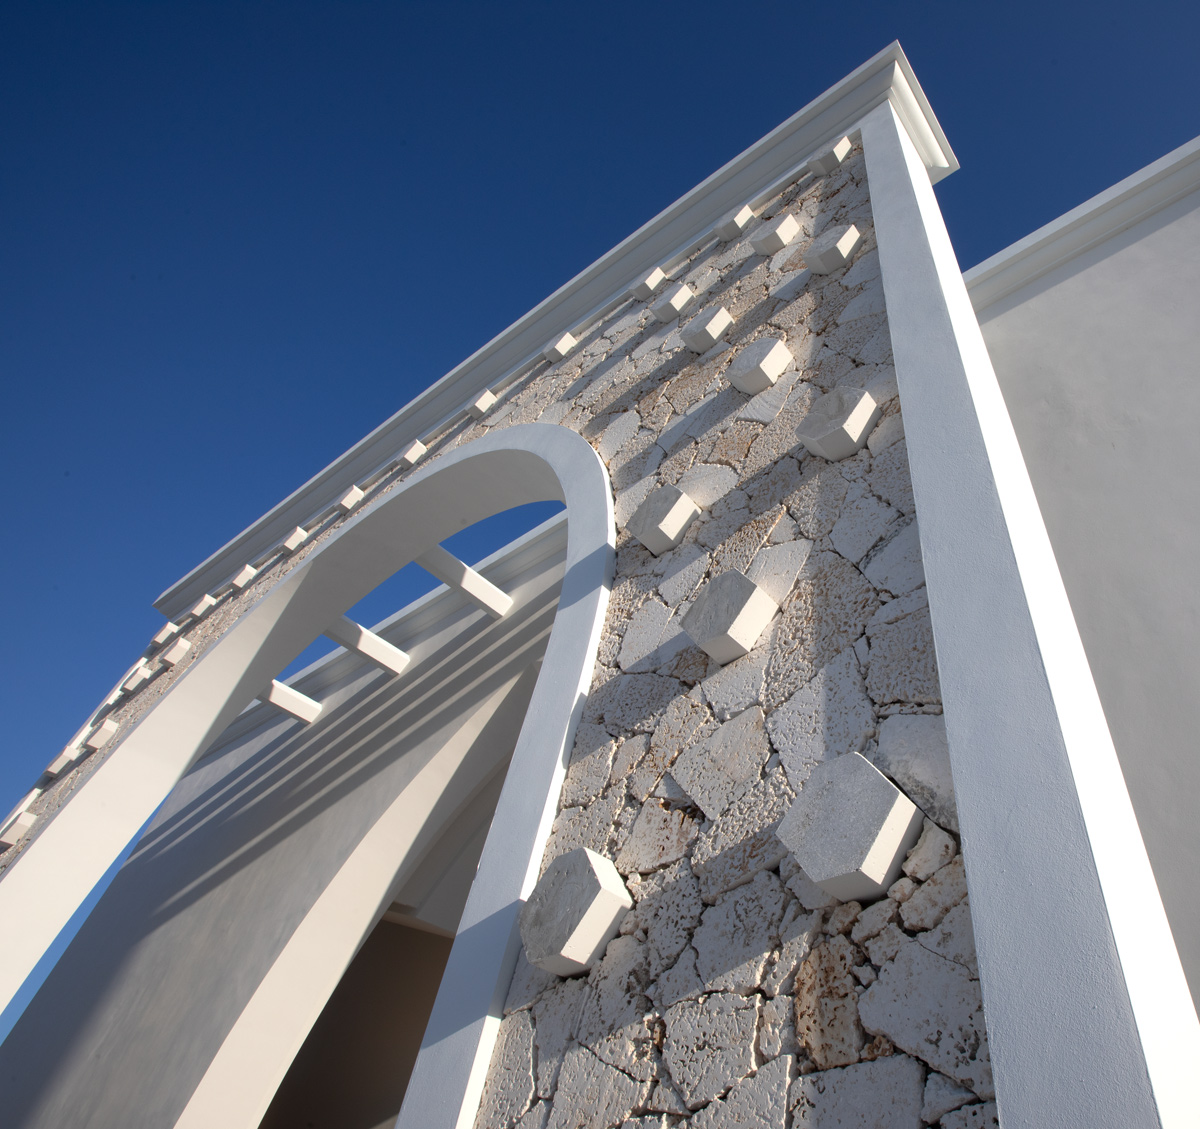 Architectural detail view of the Palmer Trinity school chapel entrance in Miami, FL